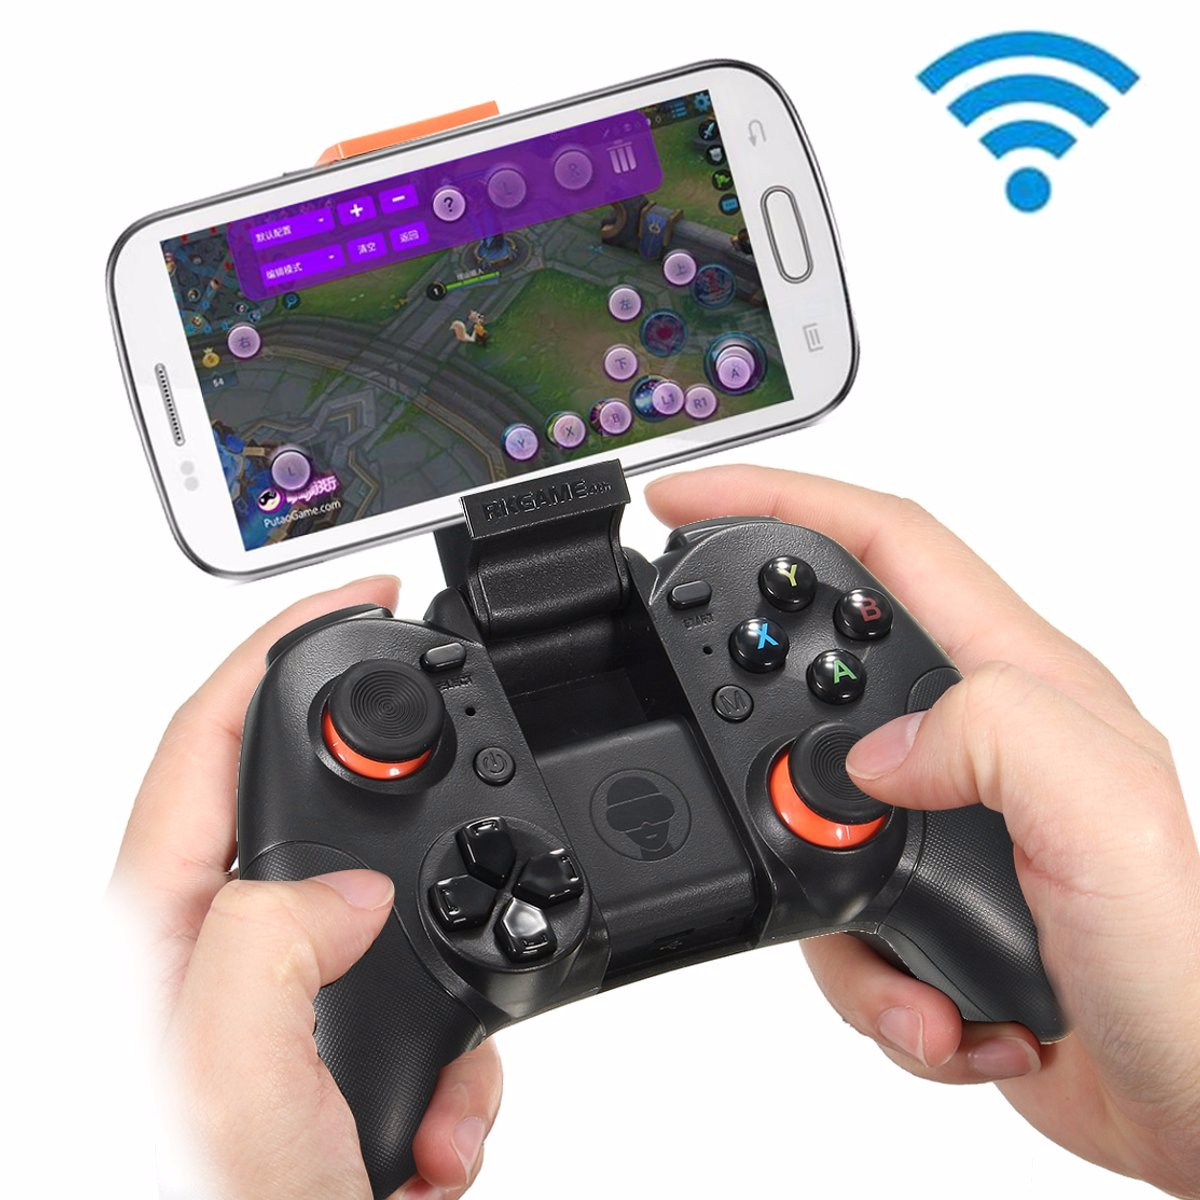 Bluetooth Wireless Game Controller Game pad Gaming Joystick for Android iOS PC emulator